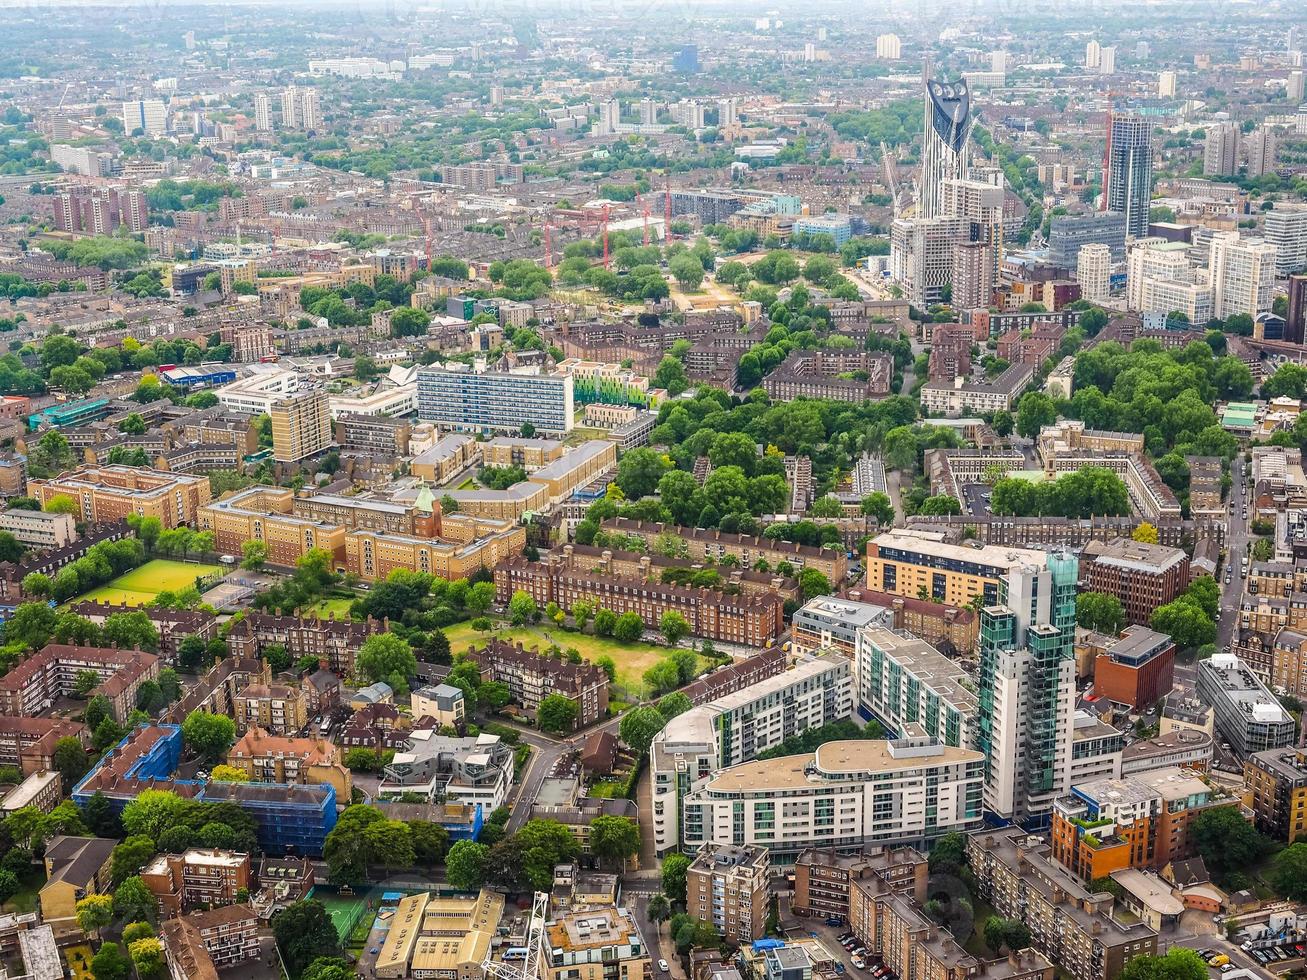 HDR Aerial view of London photo